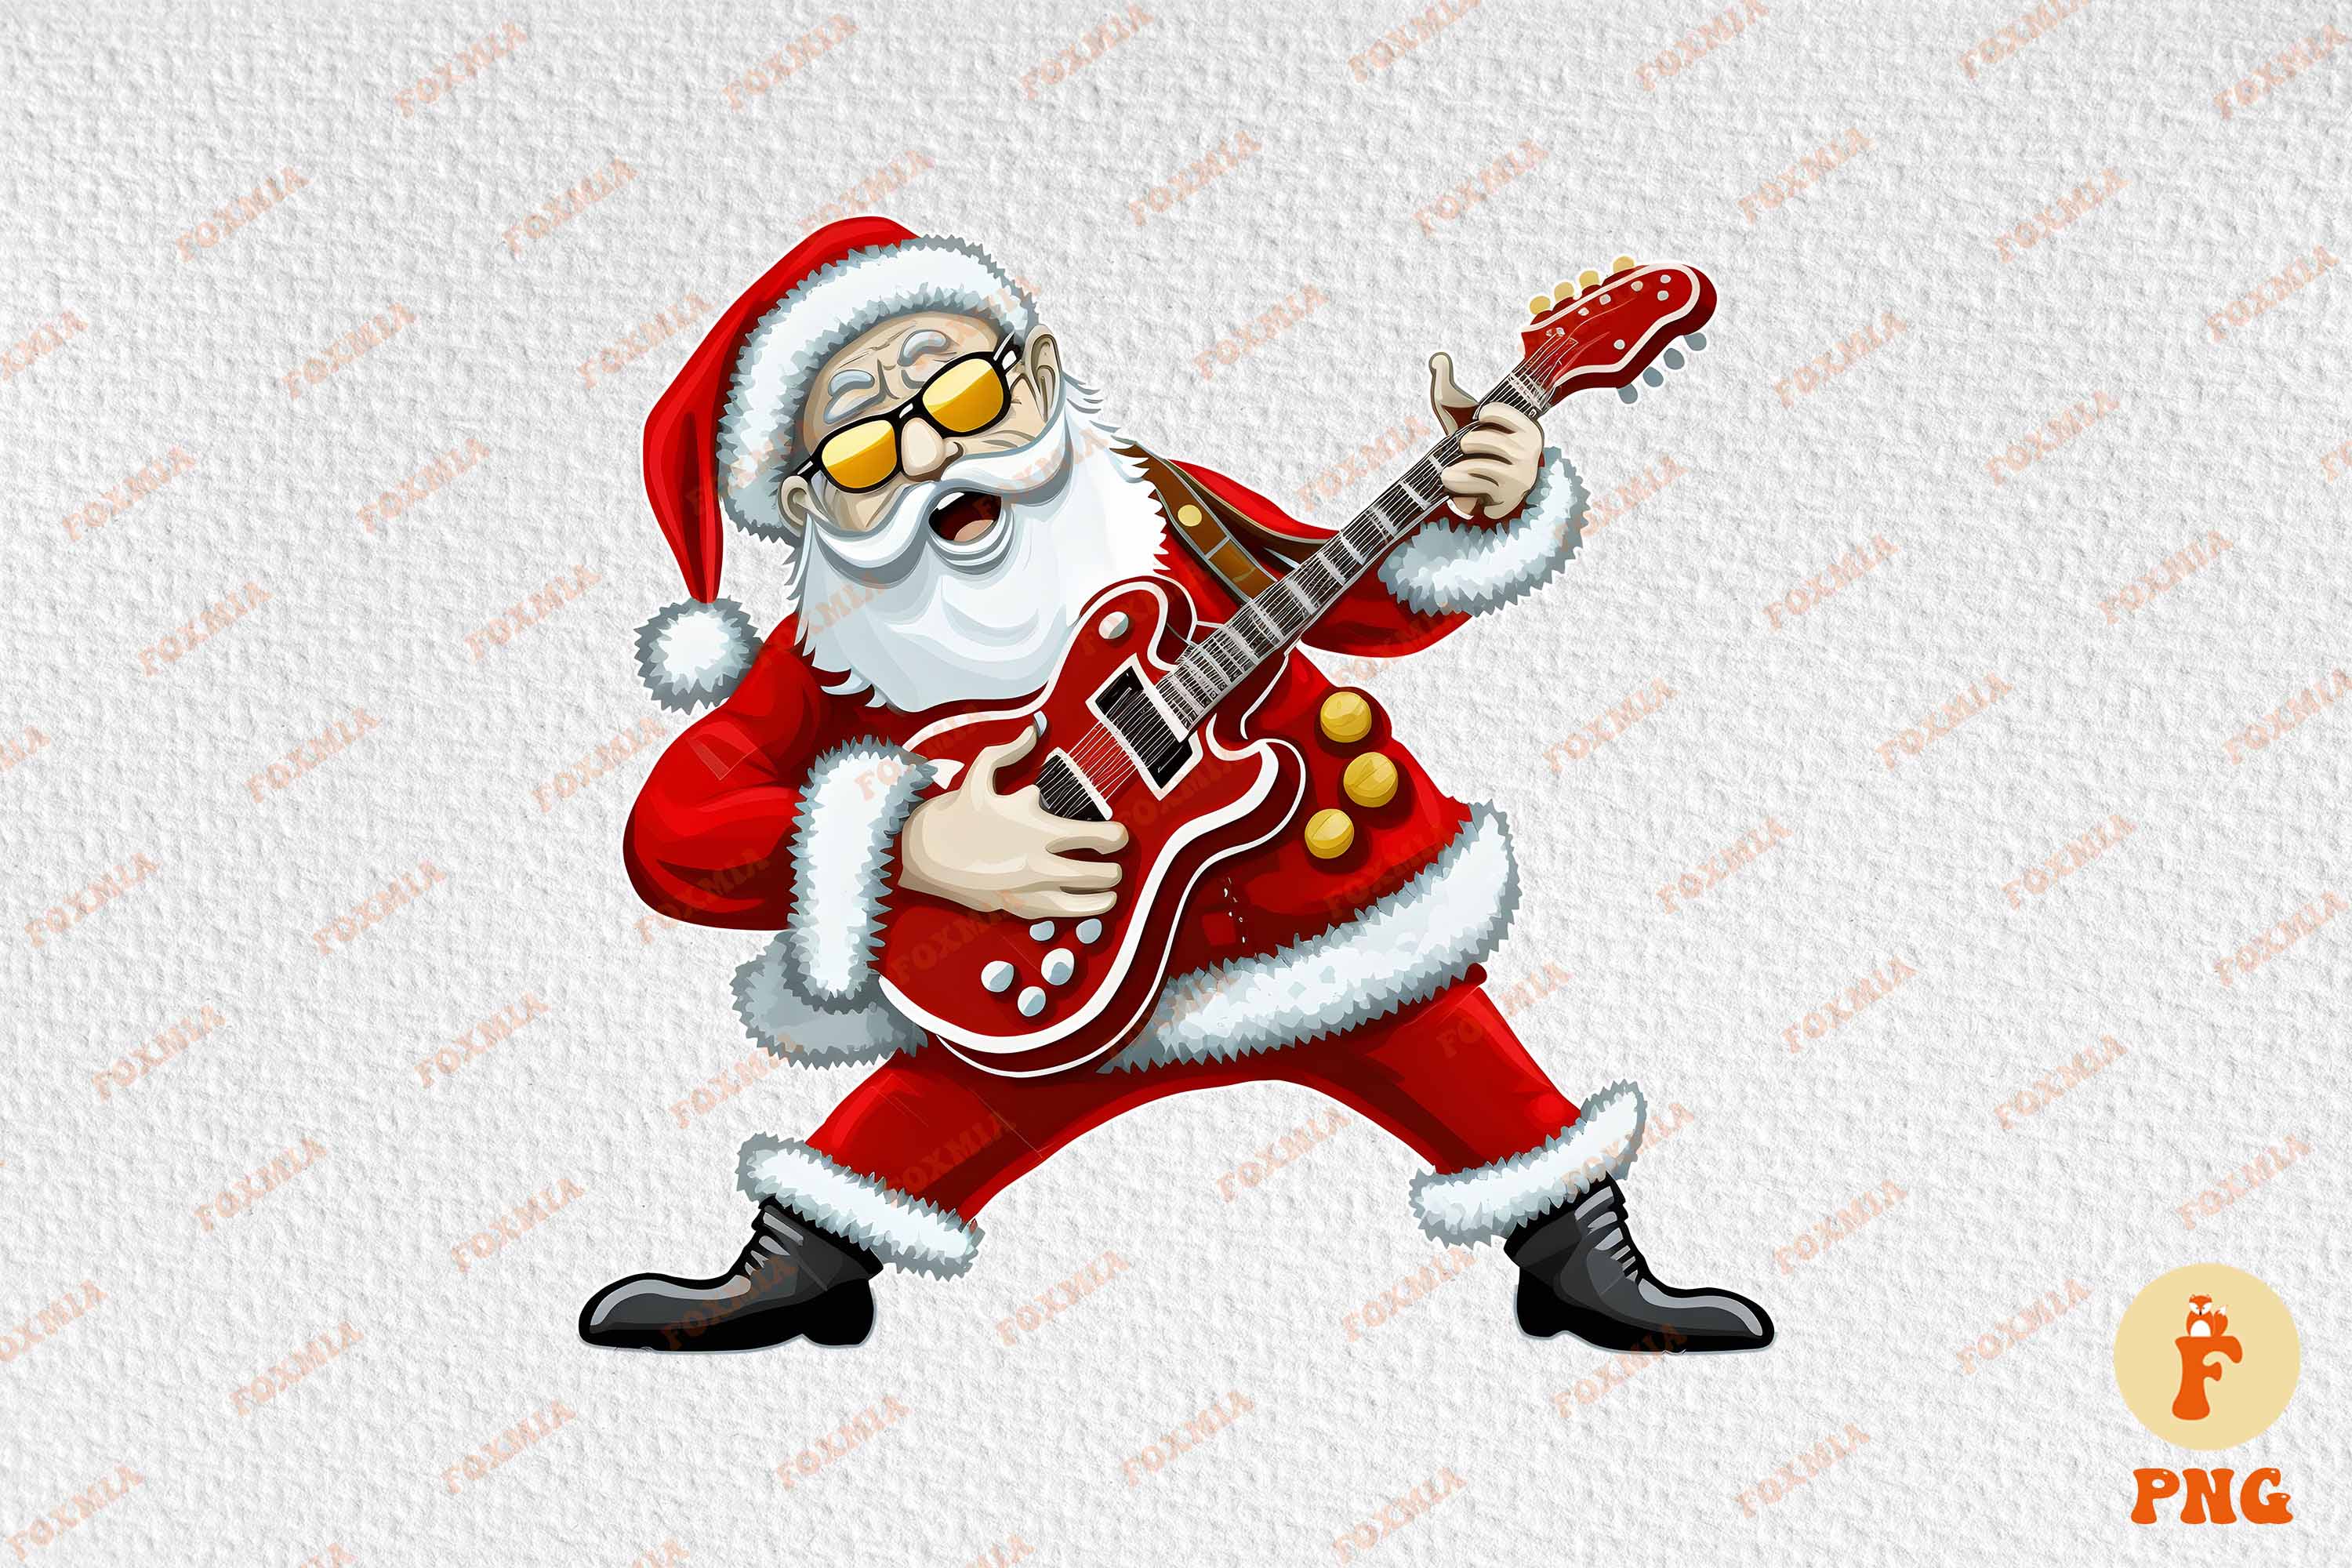 Amazing picture of Santa with a guitar.